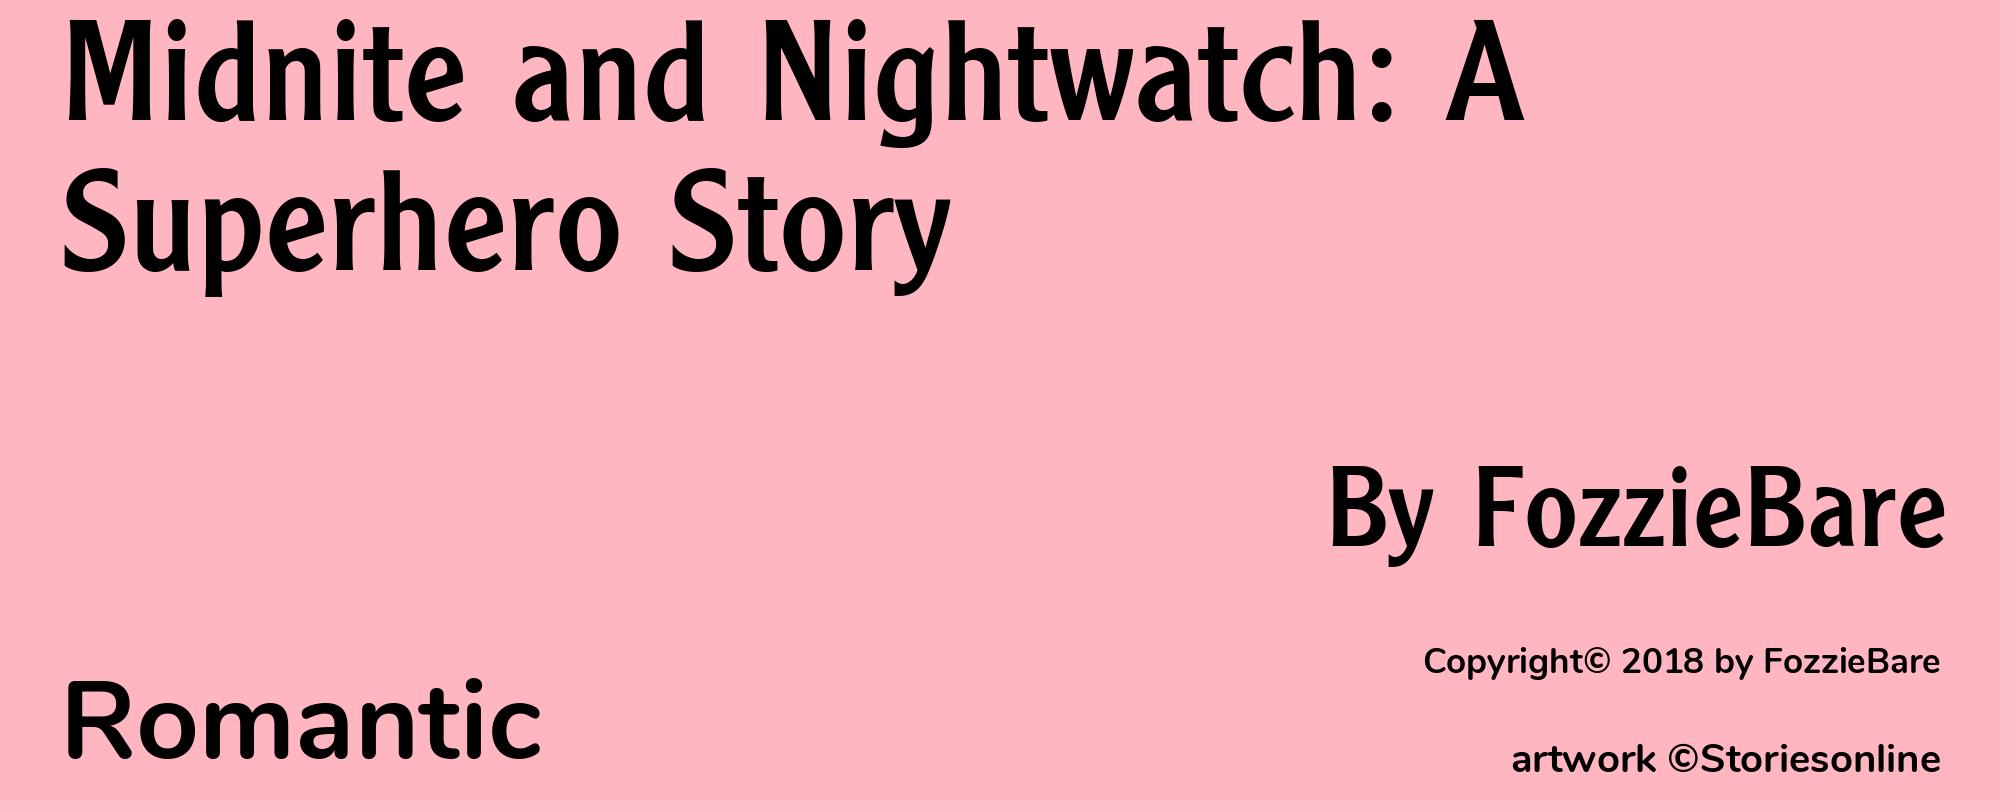 Midnite and Nightwatch: A Superhero Story - Cover